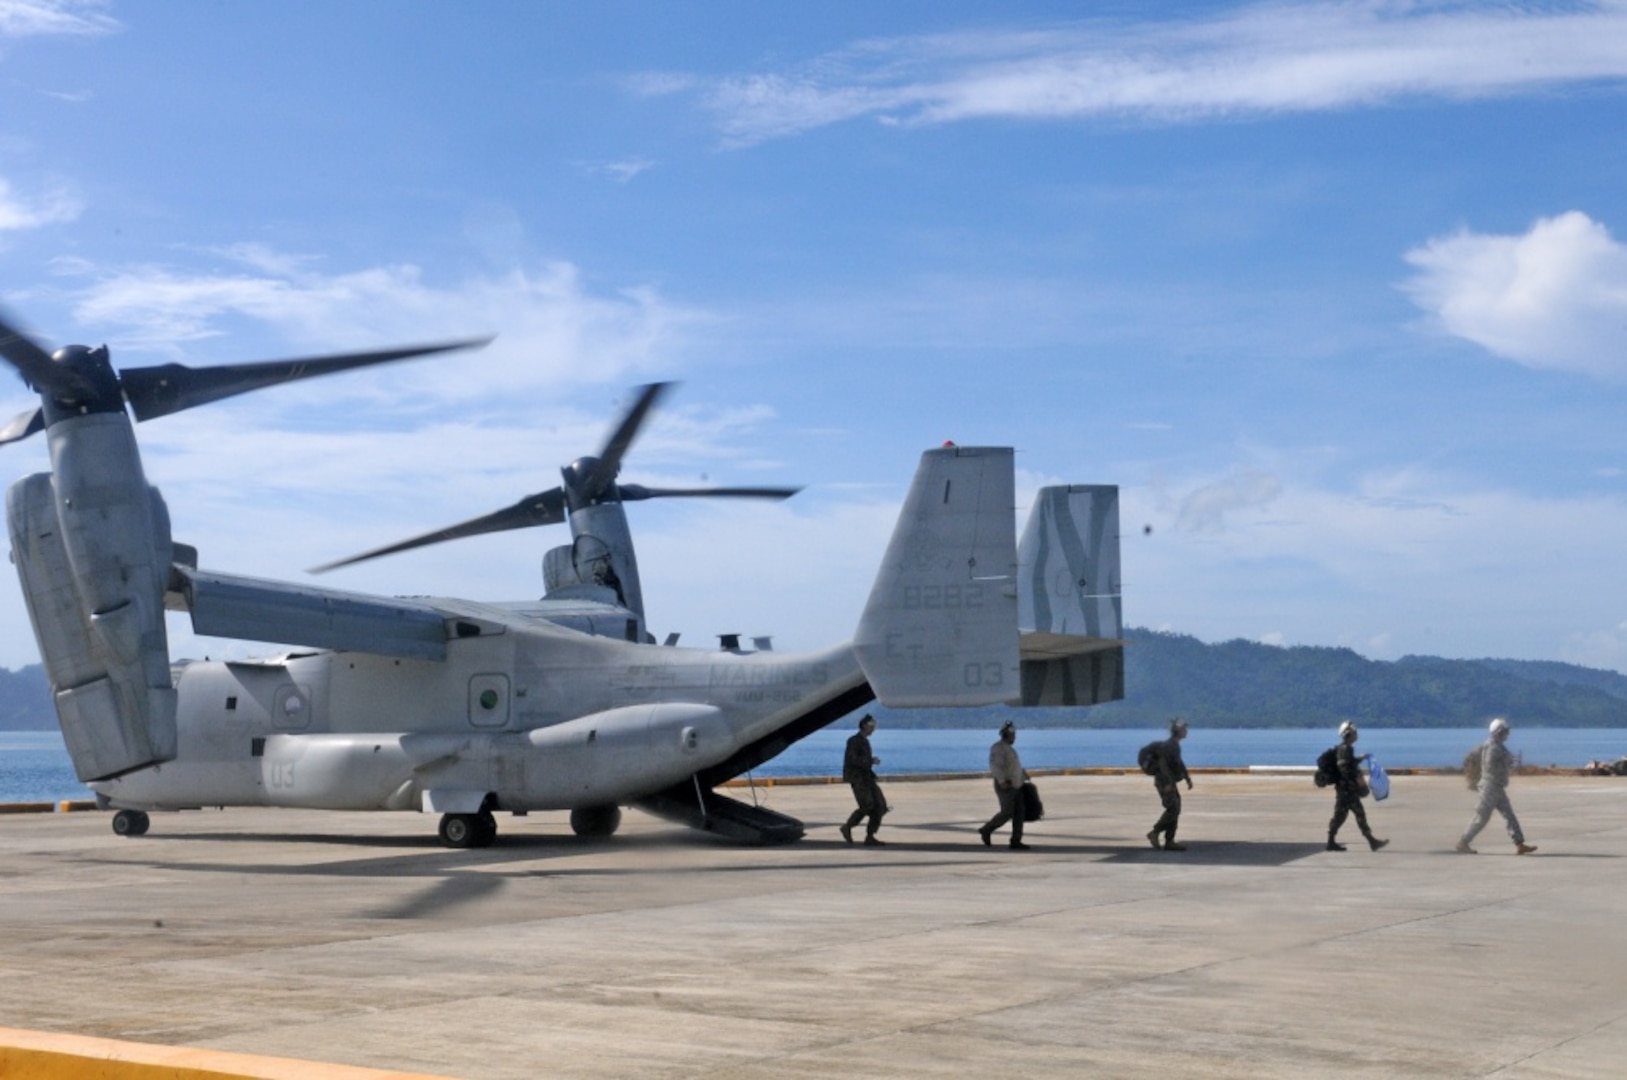 U.S. Soldiers and Sailors exit a U.S. Marine MV-22 Osprey tiltrotor aircraft during civil military activities from the sea at Casiguran Port, Casiguran, May 15, 2017. By training for humanitarian assistance and disaster response operations, U.S. and Philippine forces are better prepared to provide relief from the sea to remote and austere areas of the Philippines. Balikatan is an annual U.S.-Philippine bilateral military exercise focused on a variety of missions, including humanitarian assistance and disaster relief, counterterrorism and other combined military operations. 